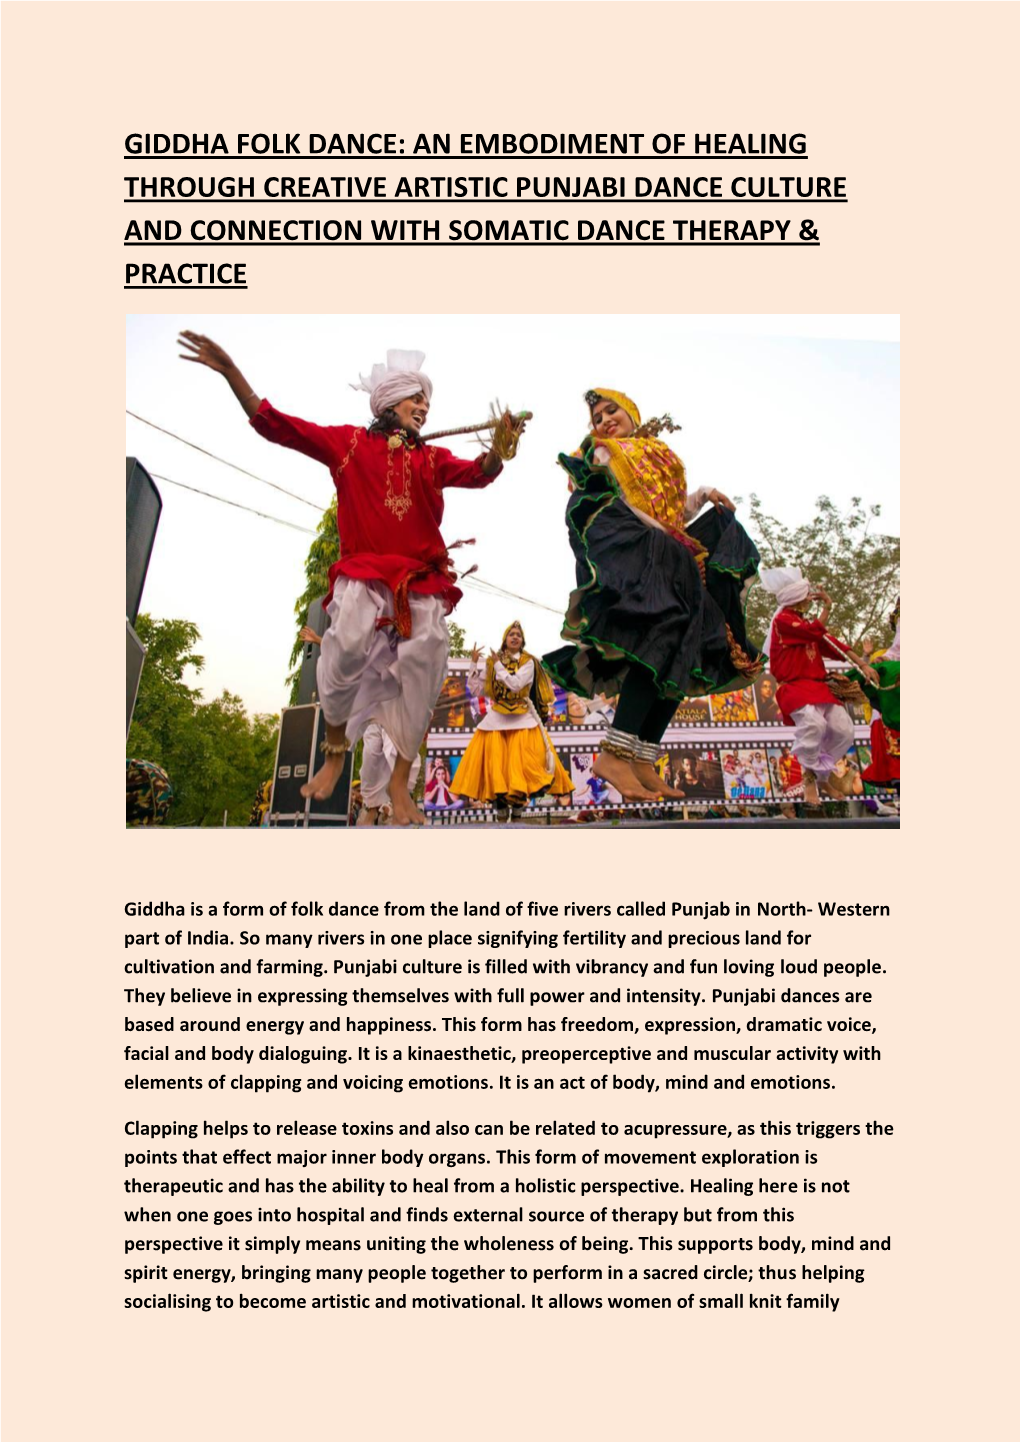 Giddha Folk Dance: an Embodiment of Healing Through Creative Artistic Punjabi Dance Culture and Connection with Somatic Dance Therapy & Practice